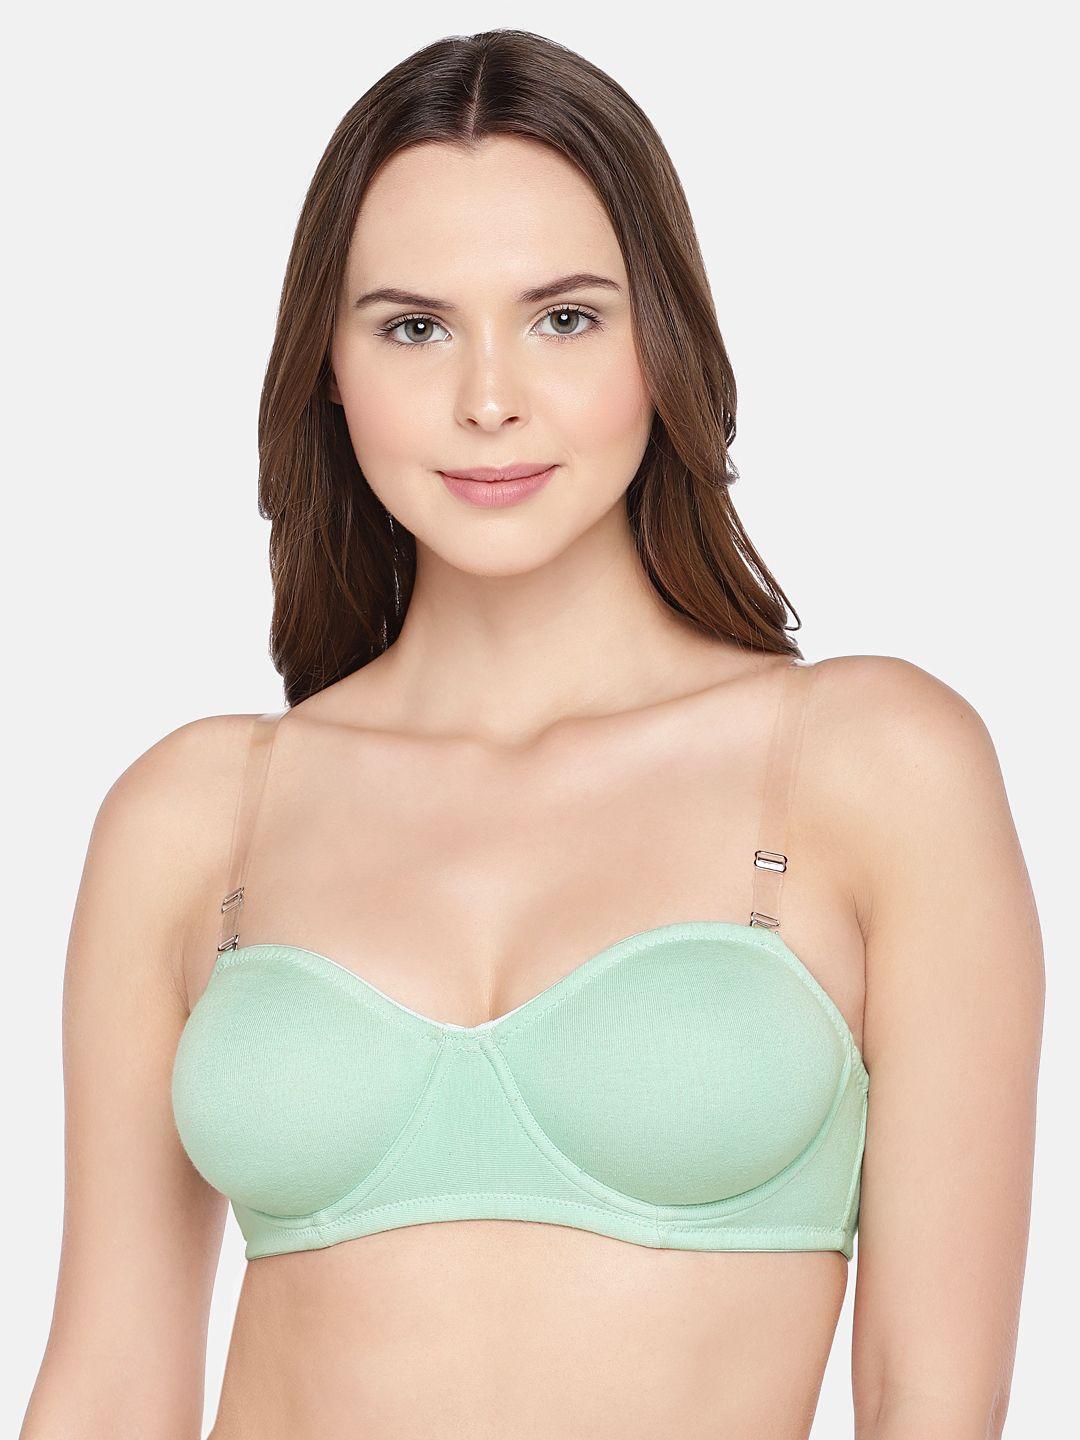 inner sense organic cotton antimicrobial non-padded strapless sustainable bra (ocean green) isb020